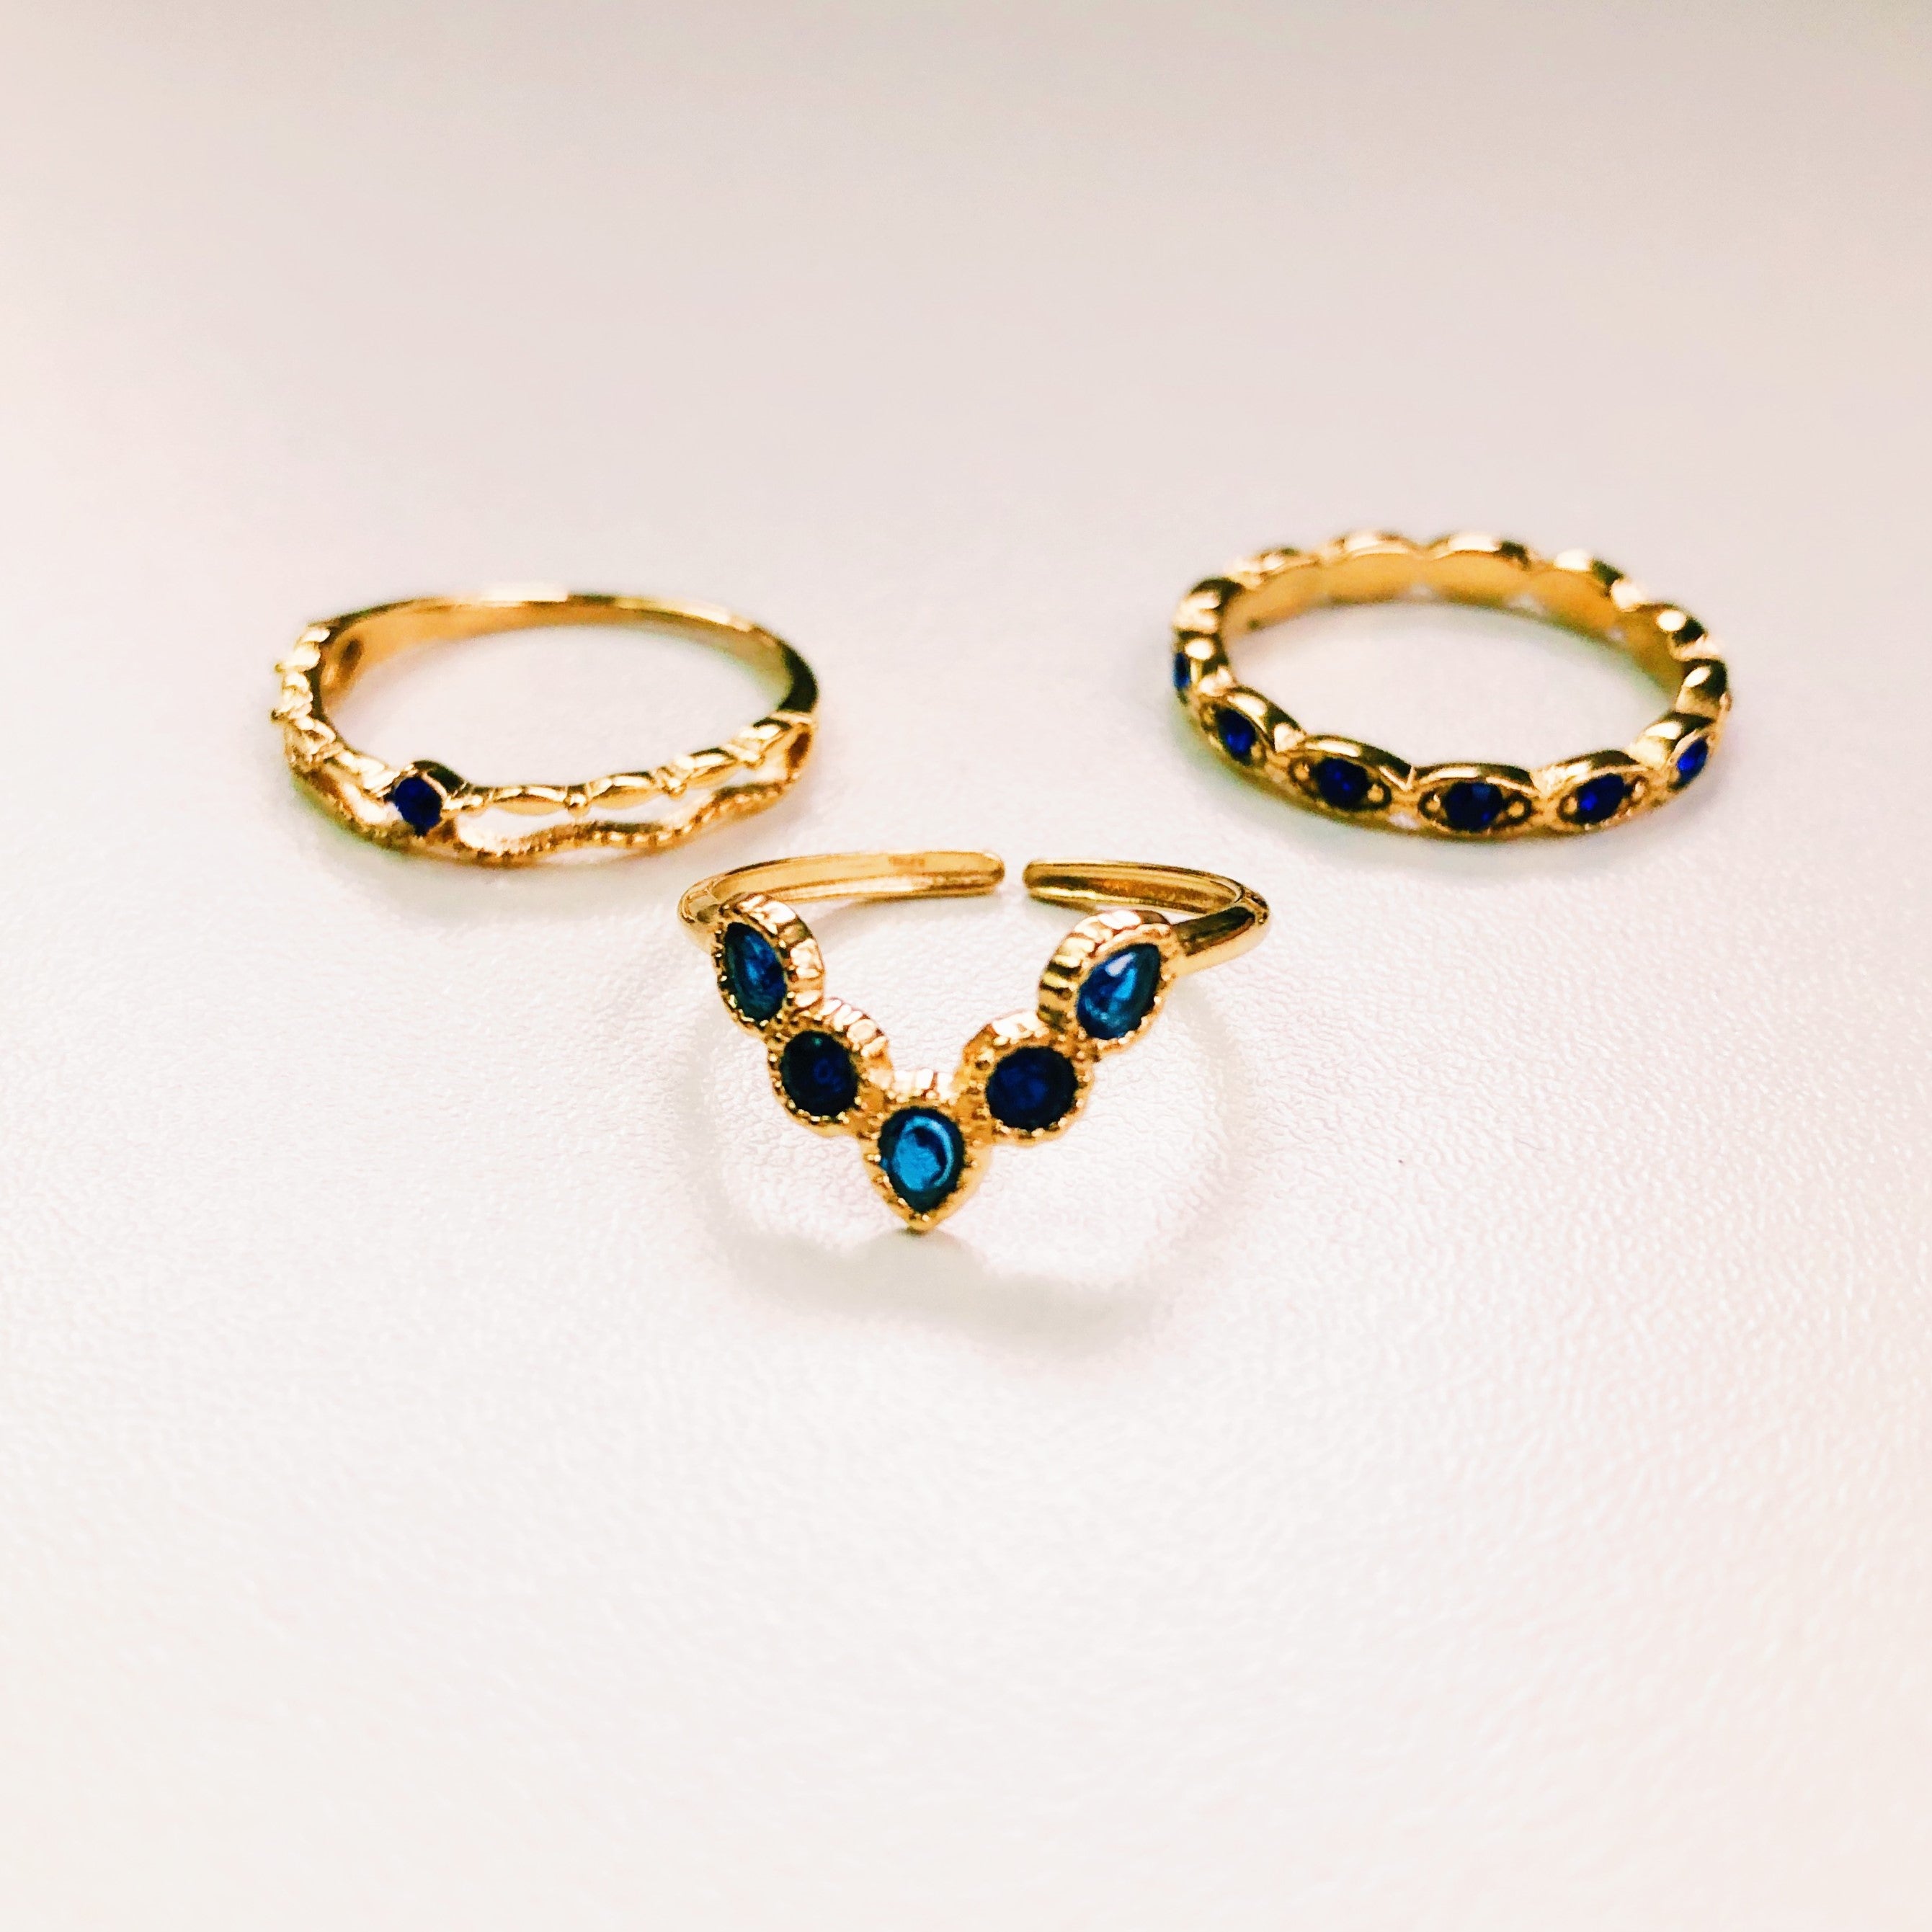 Ring salome blue